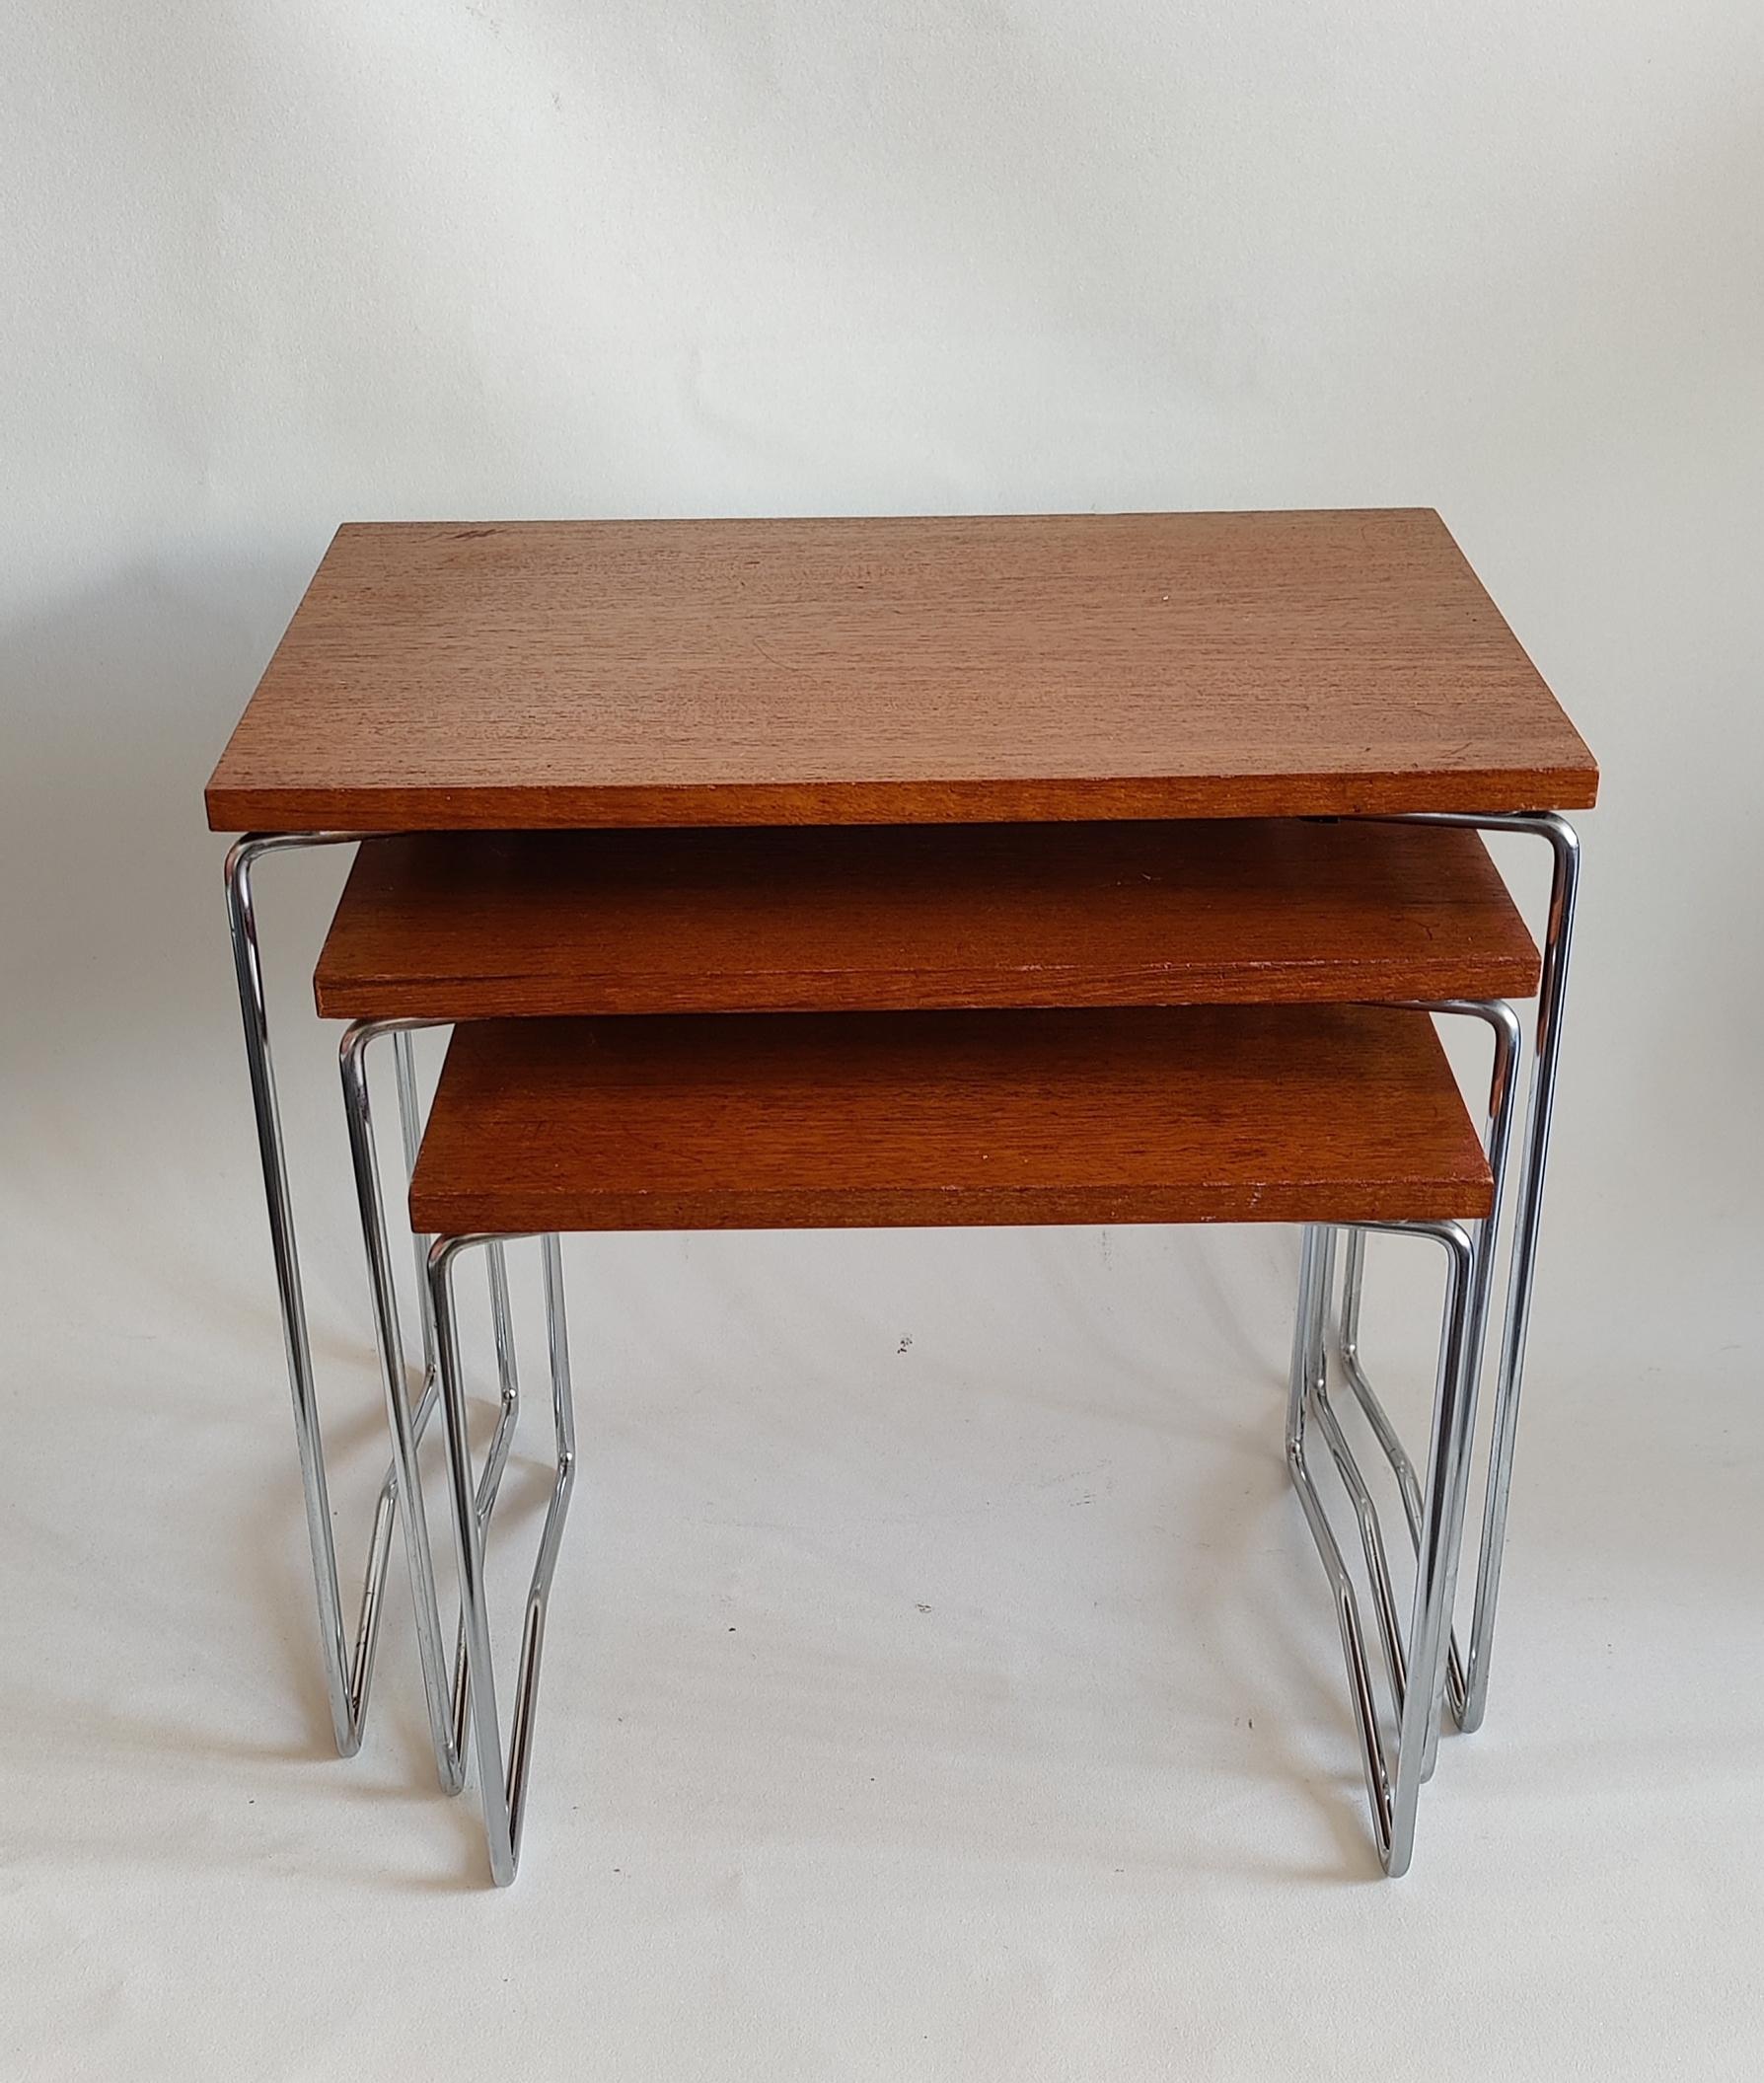 20th Century Vintage Dutch Nesting Tables by Brabantia, 1960’s For Sale